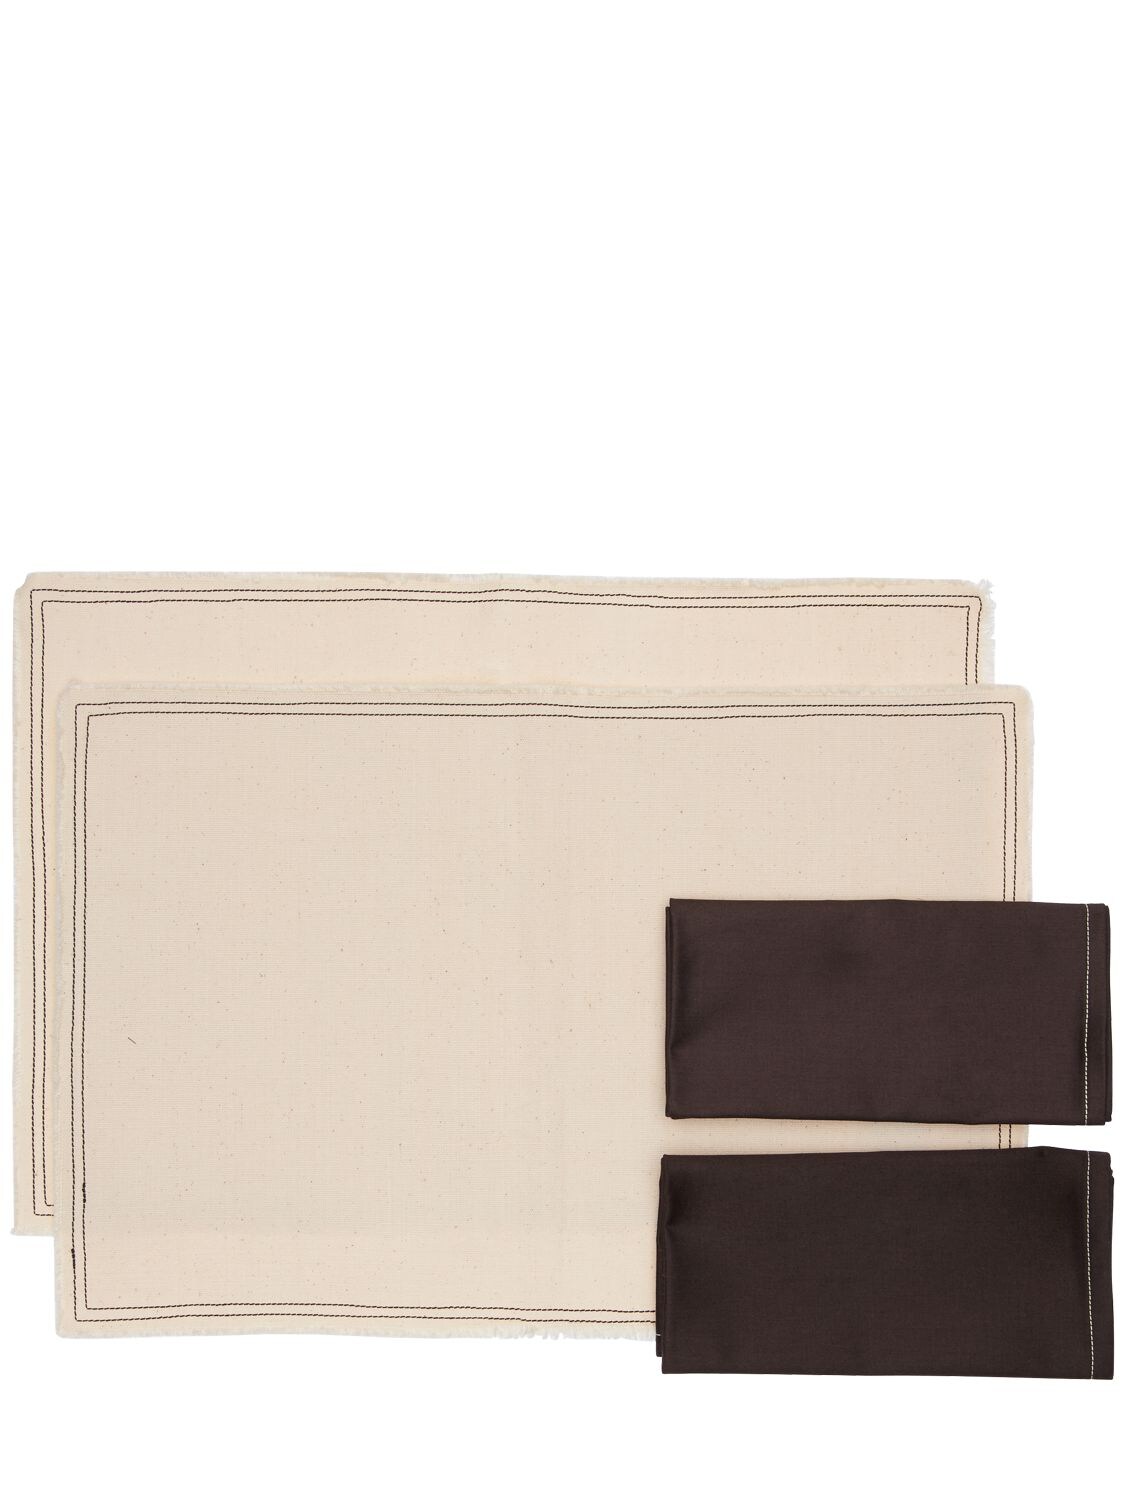 Alessandro Di Marco Set Of Two Placemats  & Napkins In Beige,brown